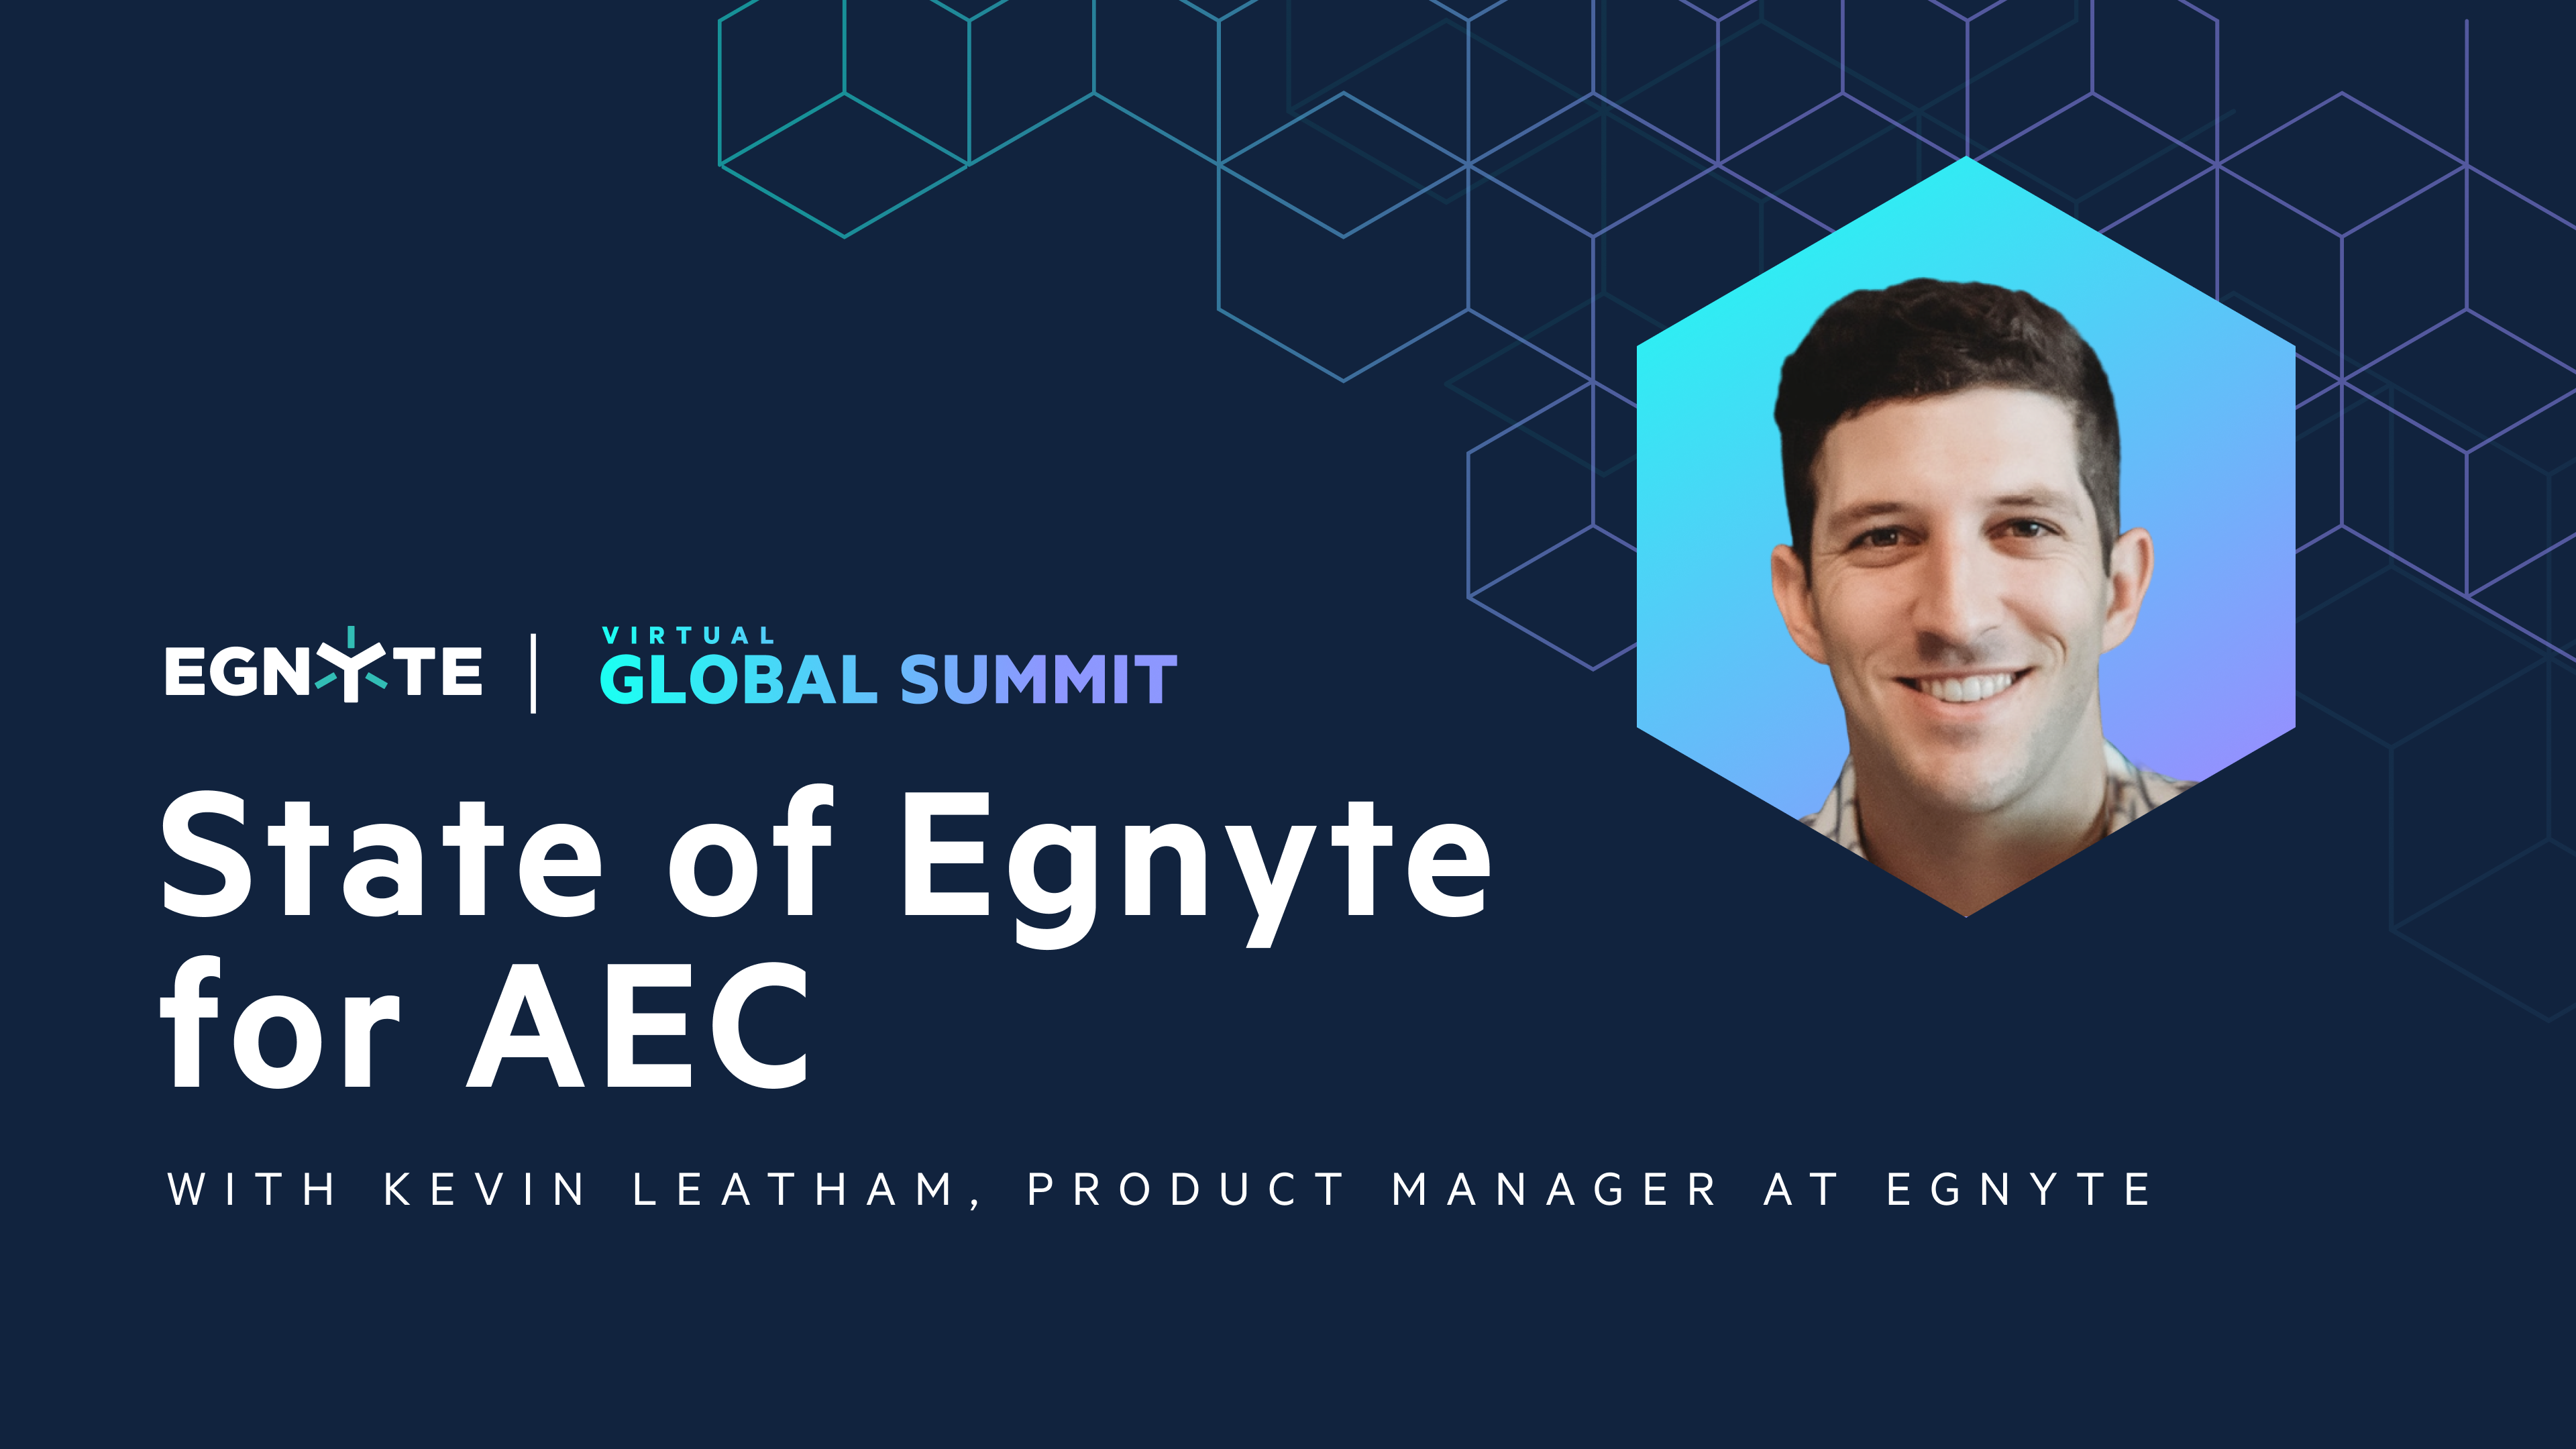 State of Egnyte for AEC